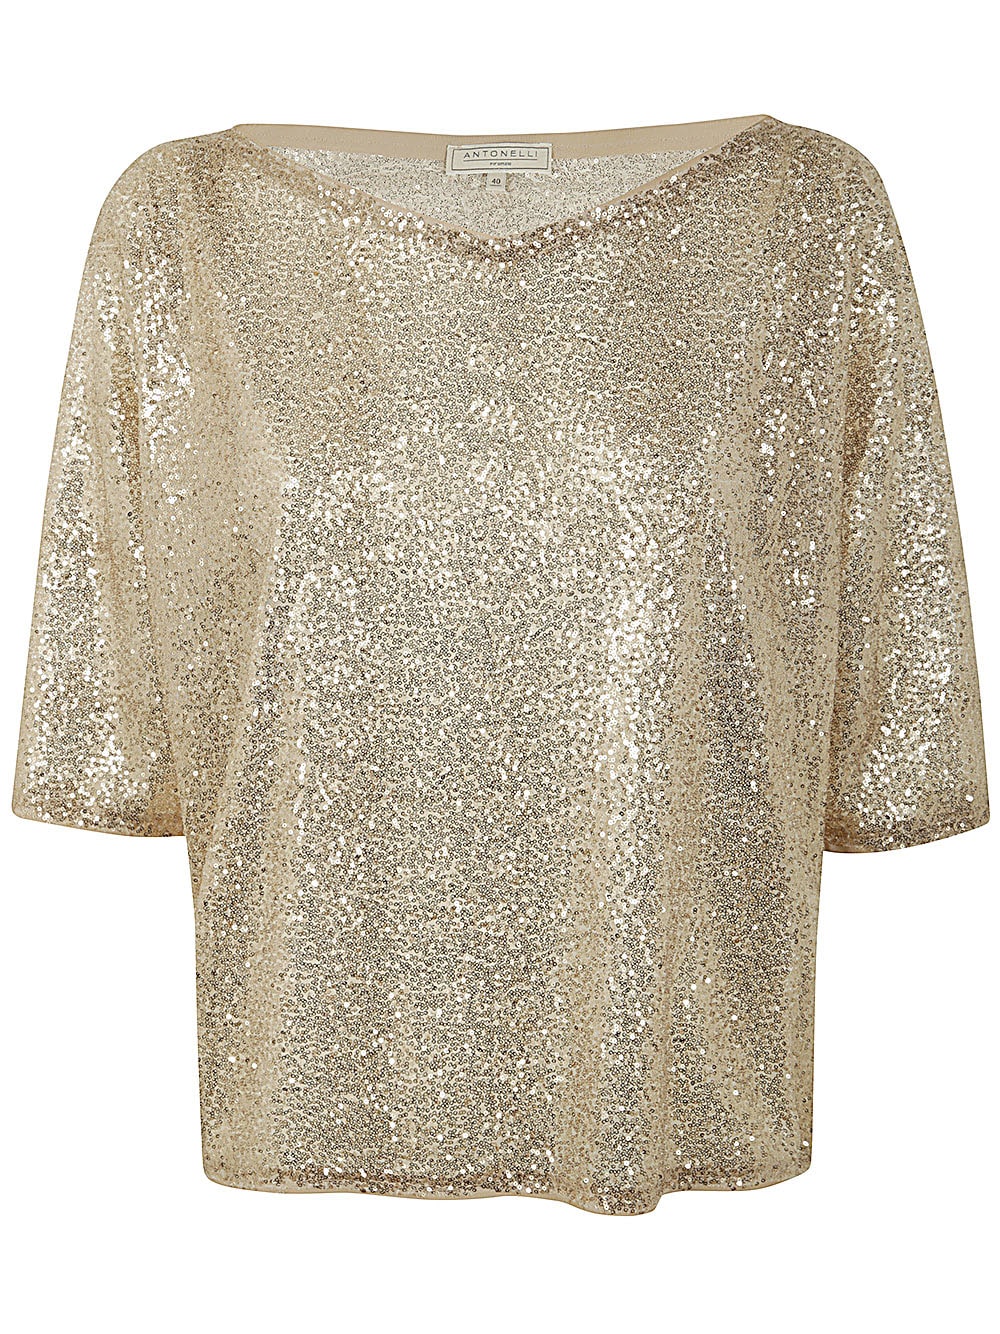 Shop Antonelli Duncan Jacket With Paillettes In Gold